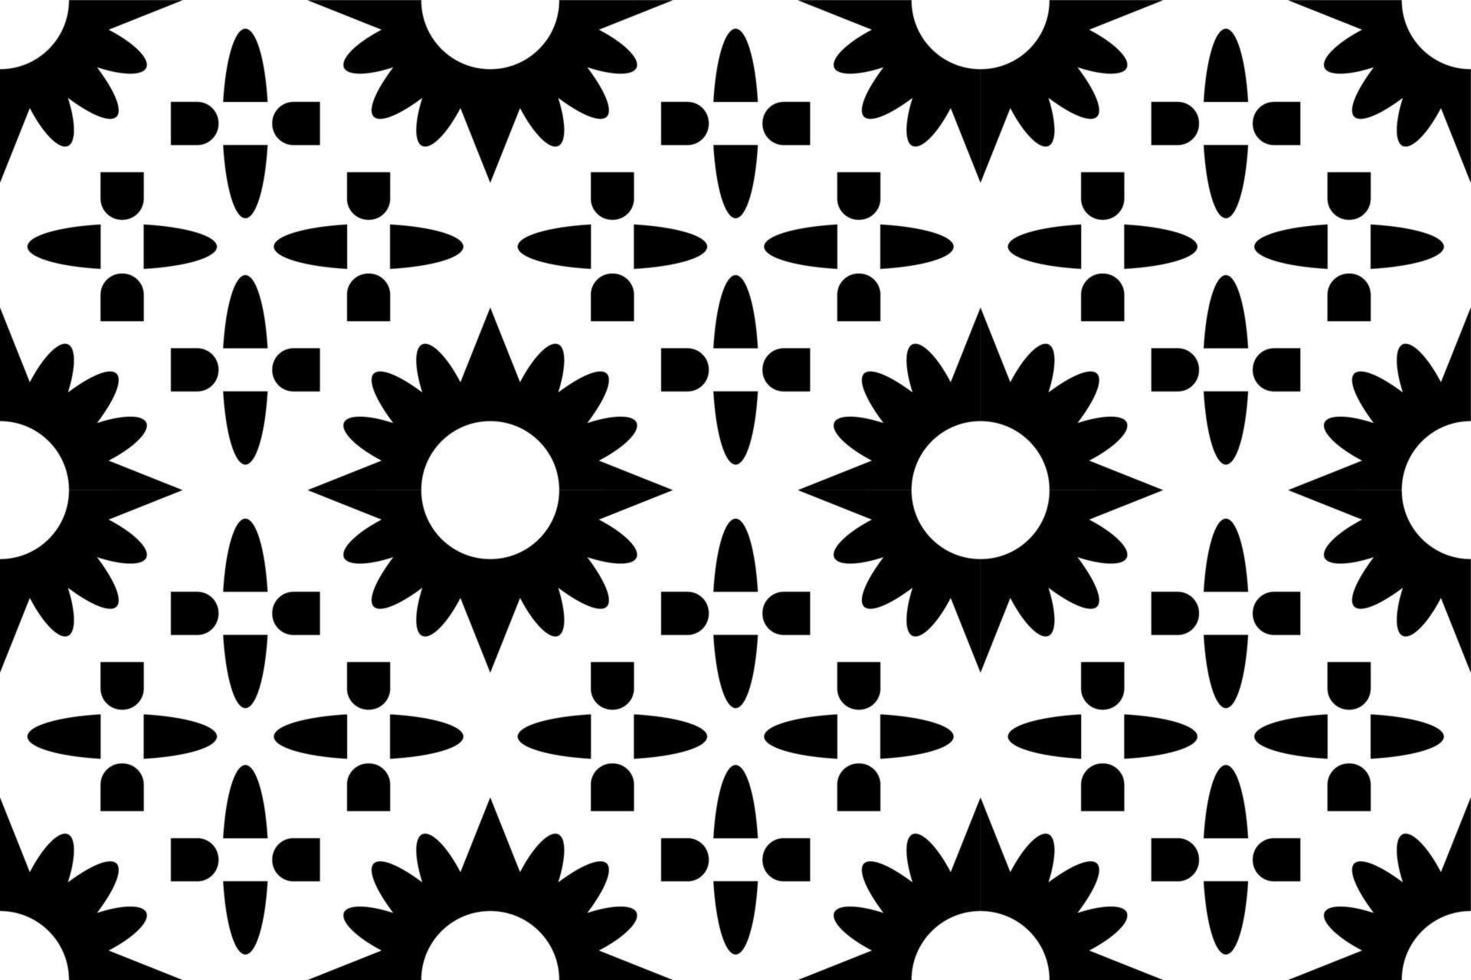 Abstract black and white pattern. Monochrome seamless geometric pattern. Repeating shapes, geometric elements. vector